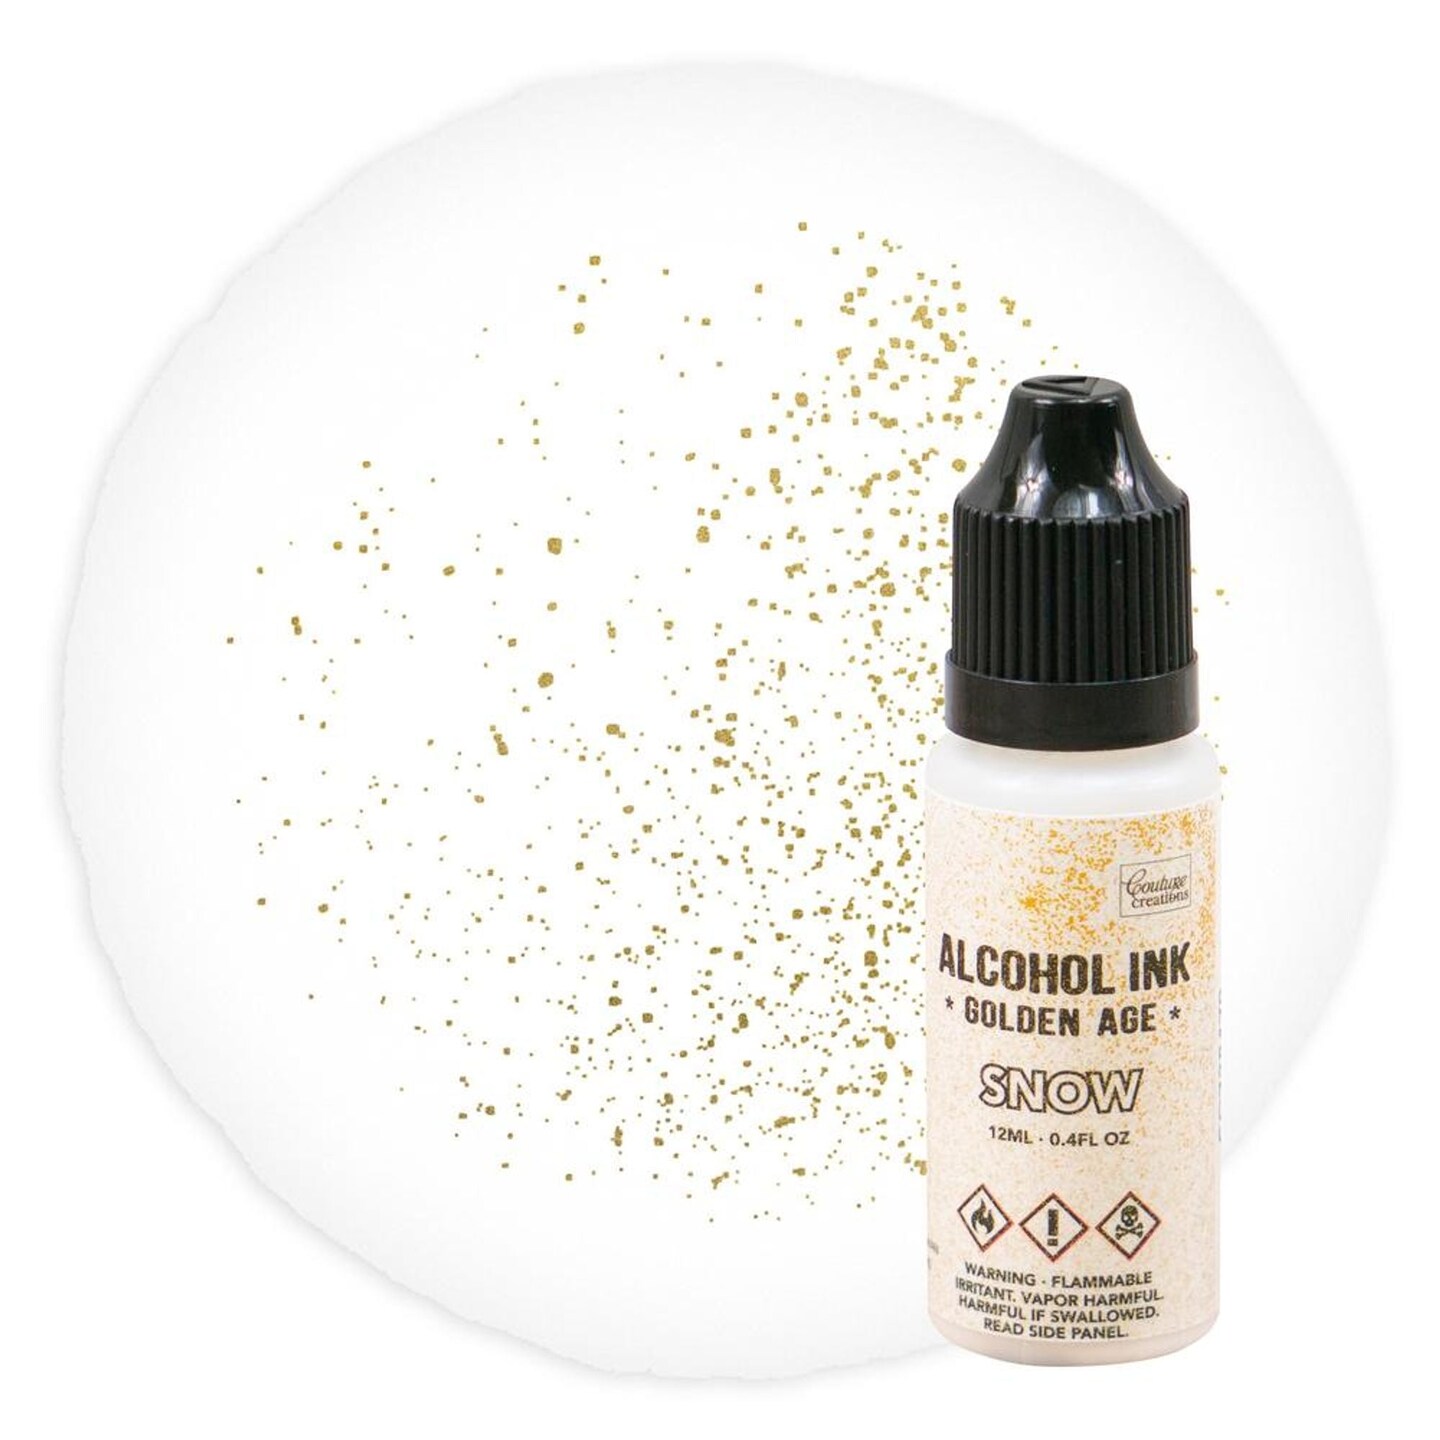 Couture Creations Alcohol Ink Golden Age 12mL | 0.4fl oz - Cappuccino